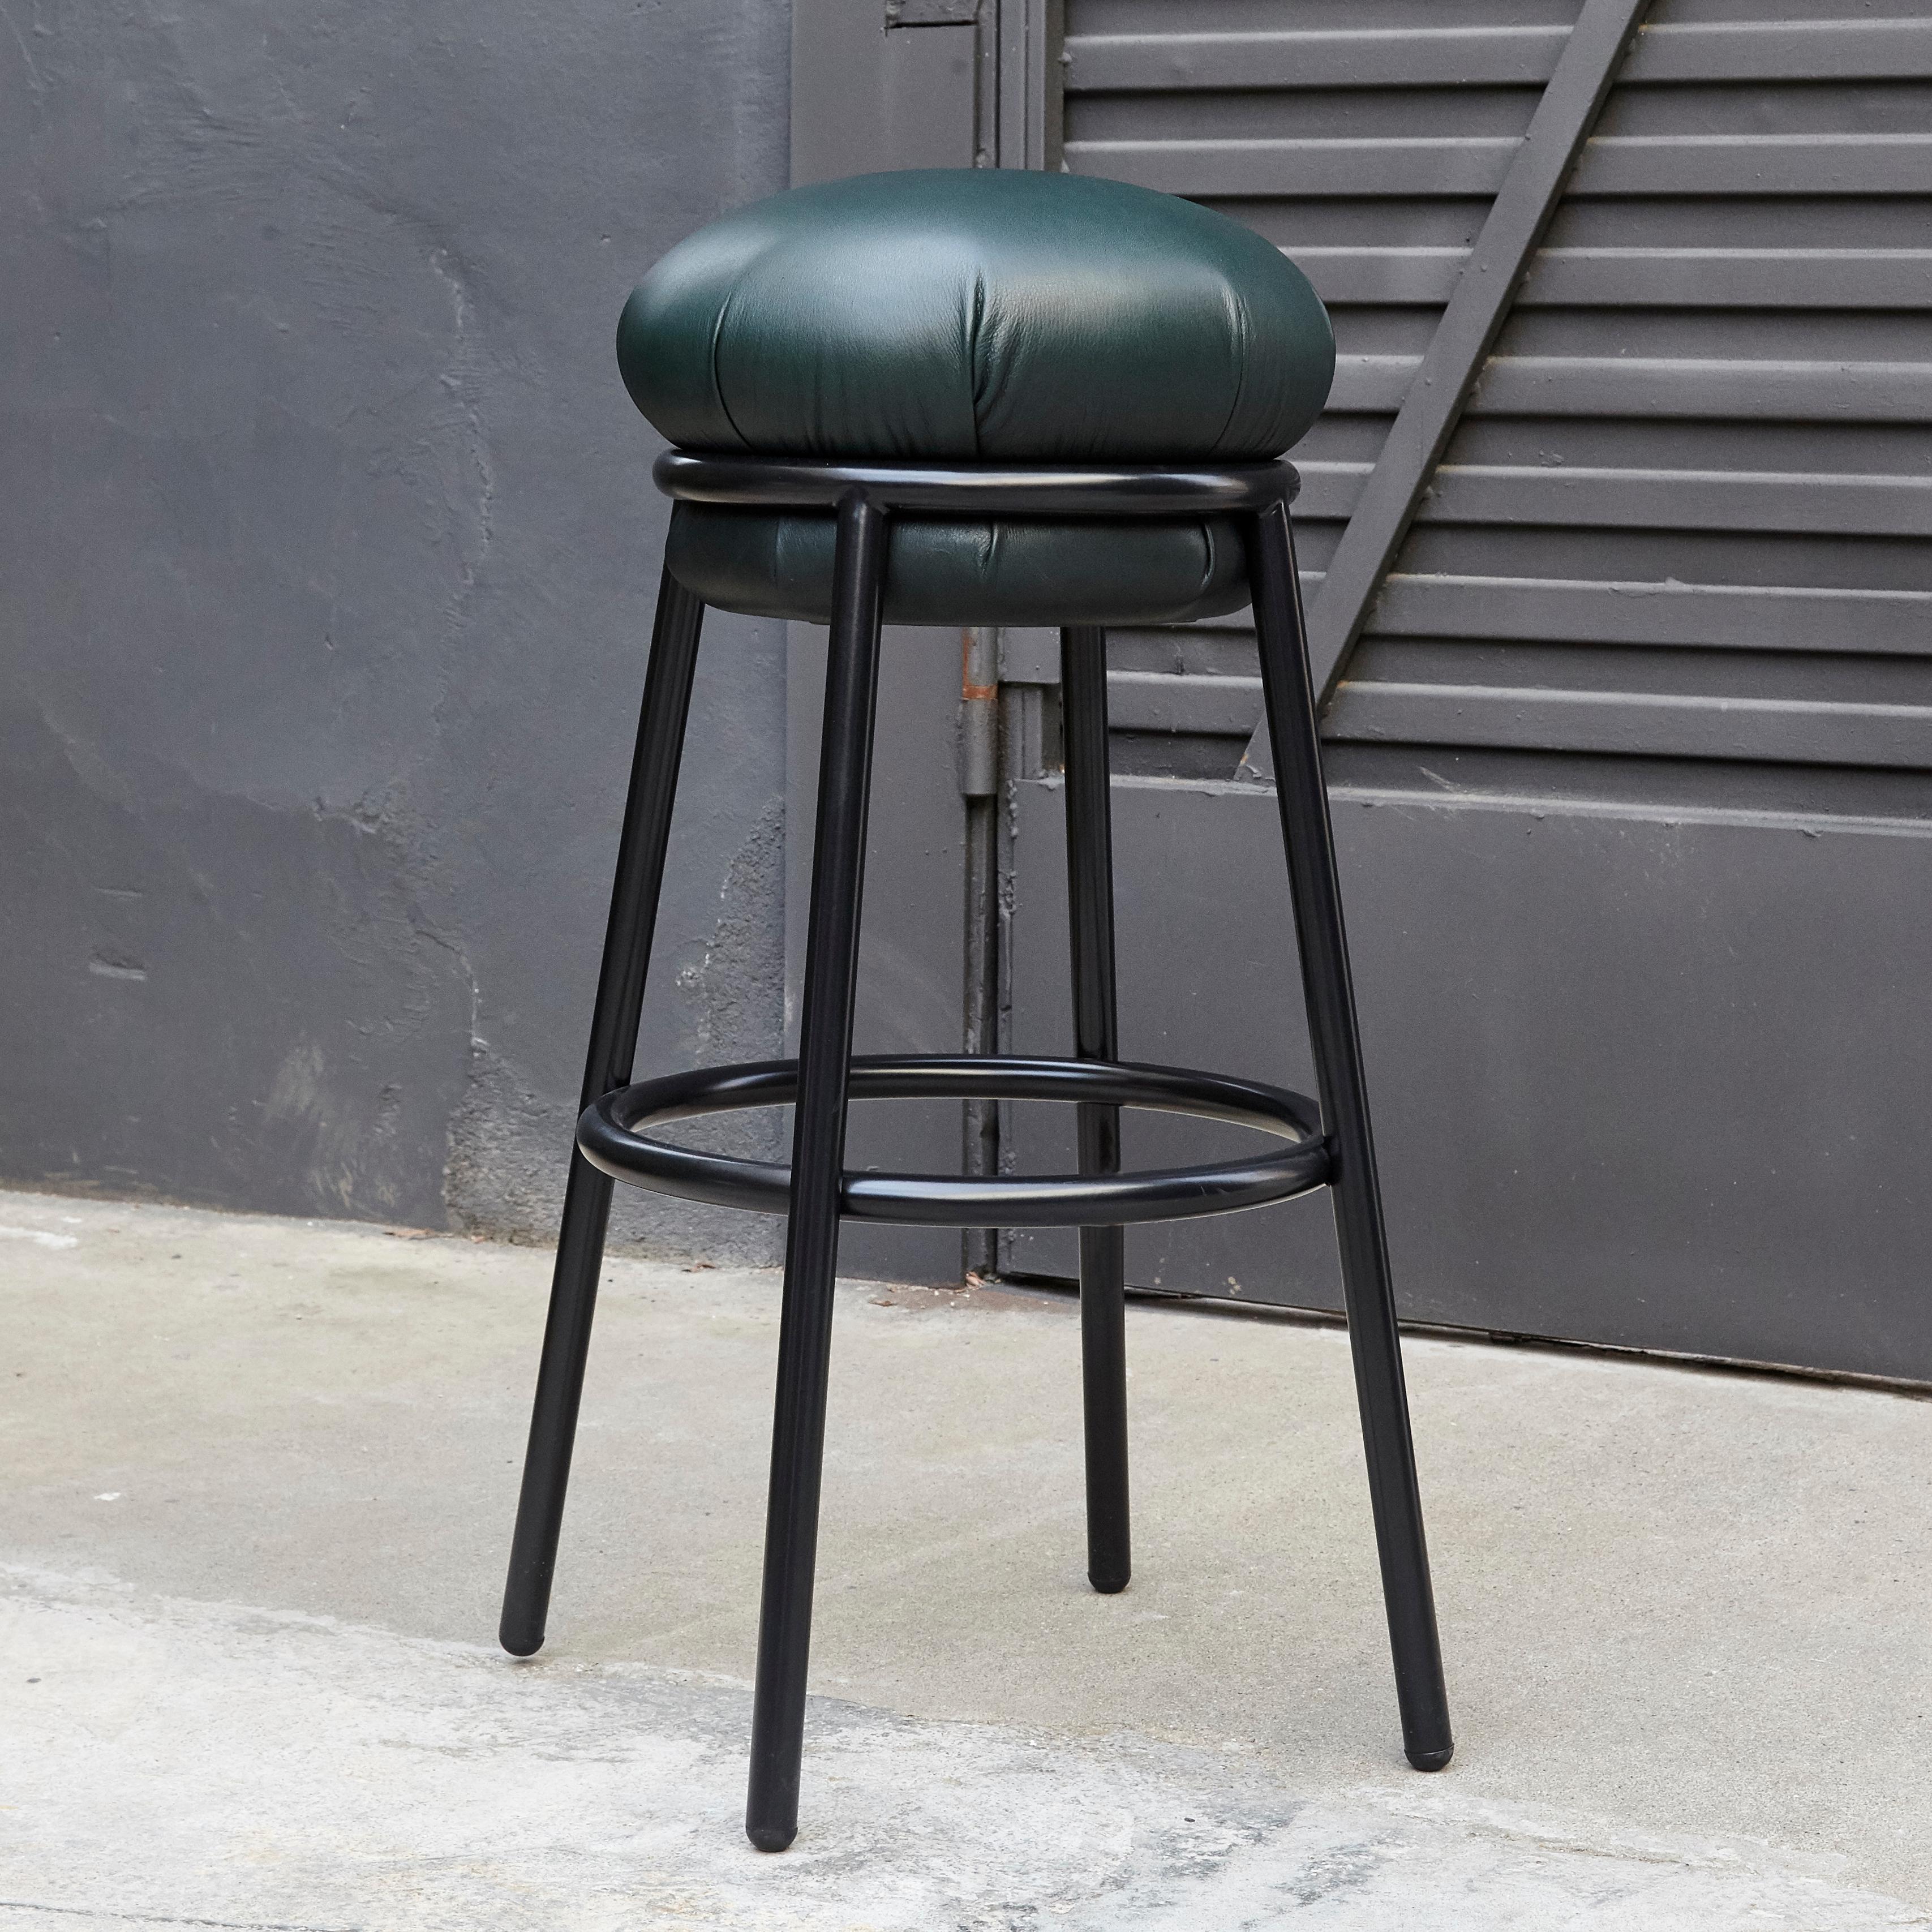 Spanish Stephen Burks Grasso Contemporary Green Leather, Black Lacquered Metal Stool